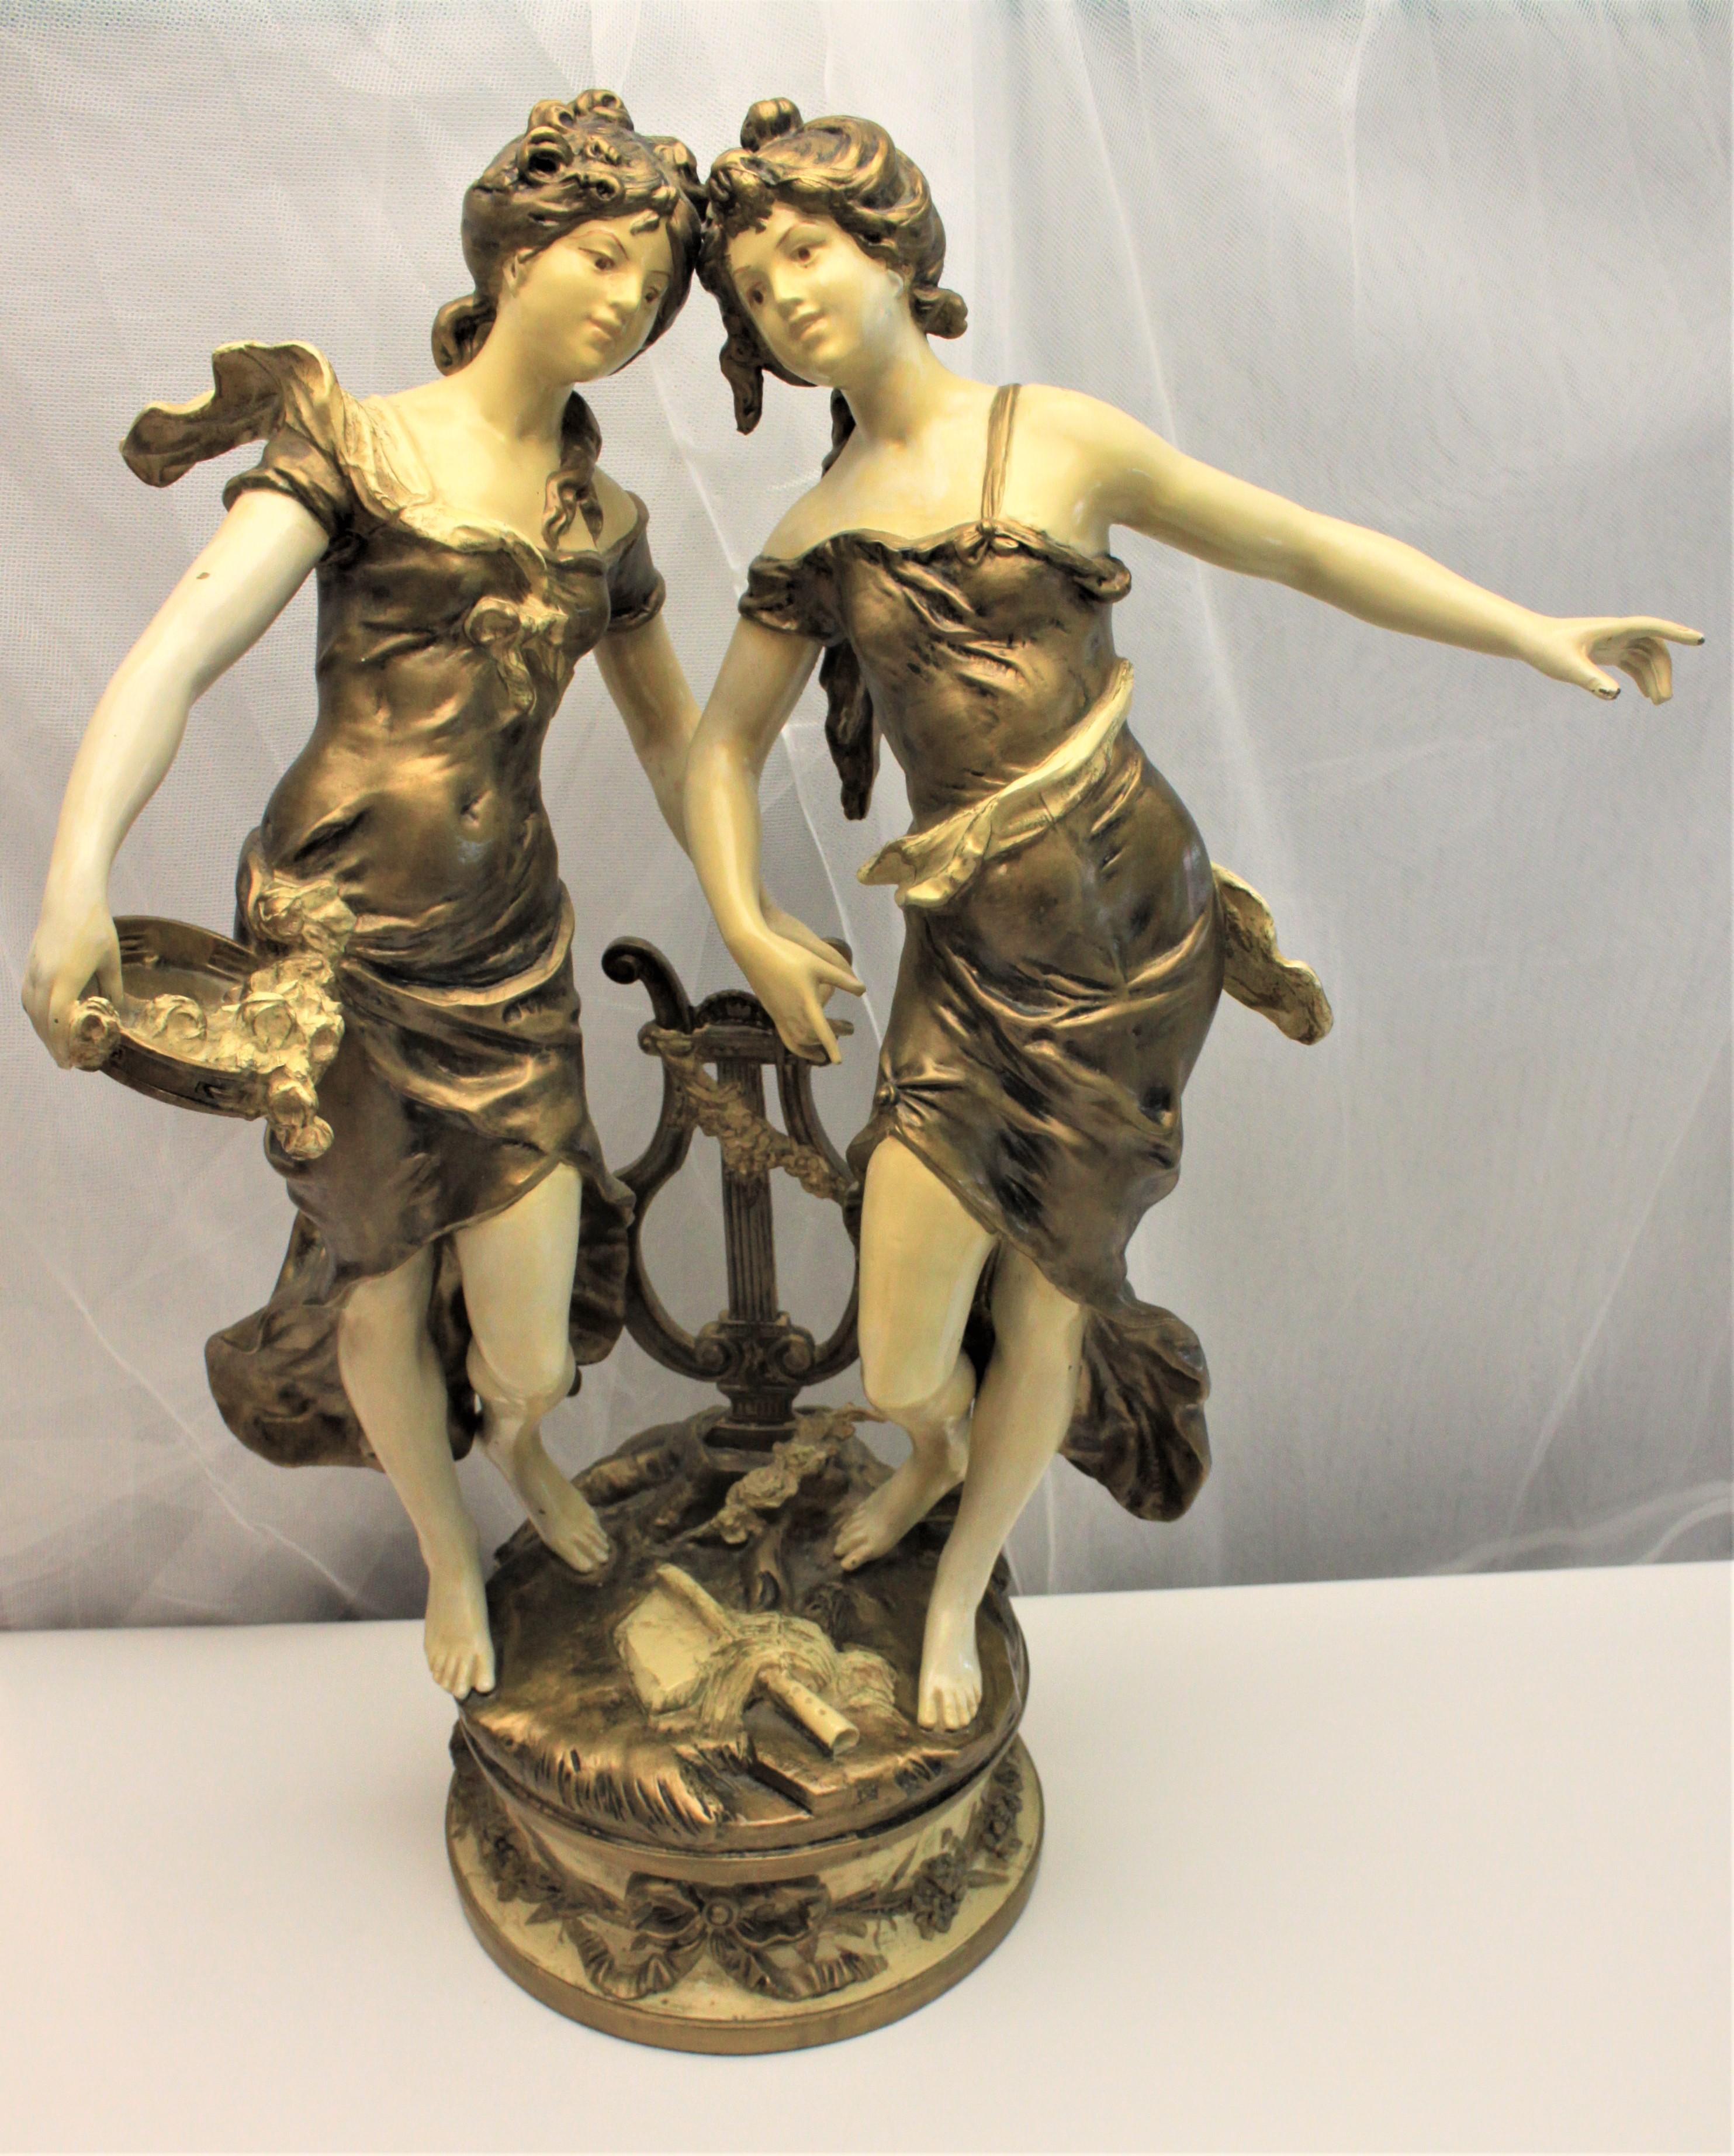 This large antique cast spelter and cold painted sculpture portrays two dancing women around a lyre. The sculpture is painted predominately in an off white or cream and olive green and the casting is very ornate and detailed. The sculpture is